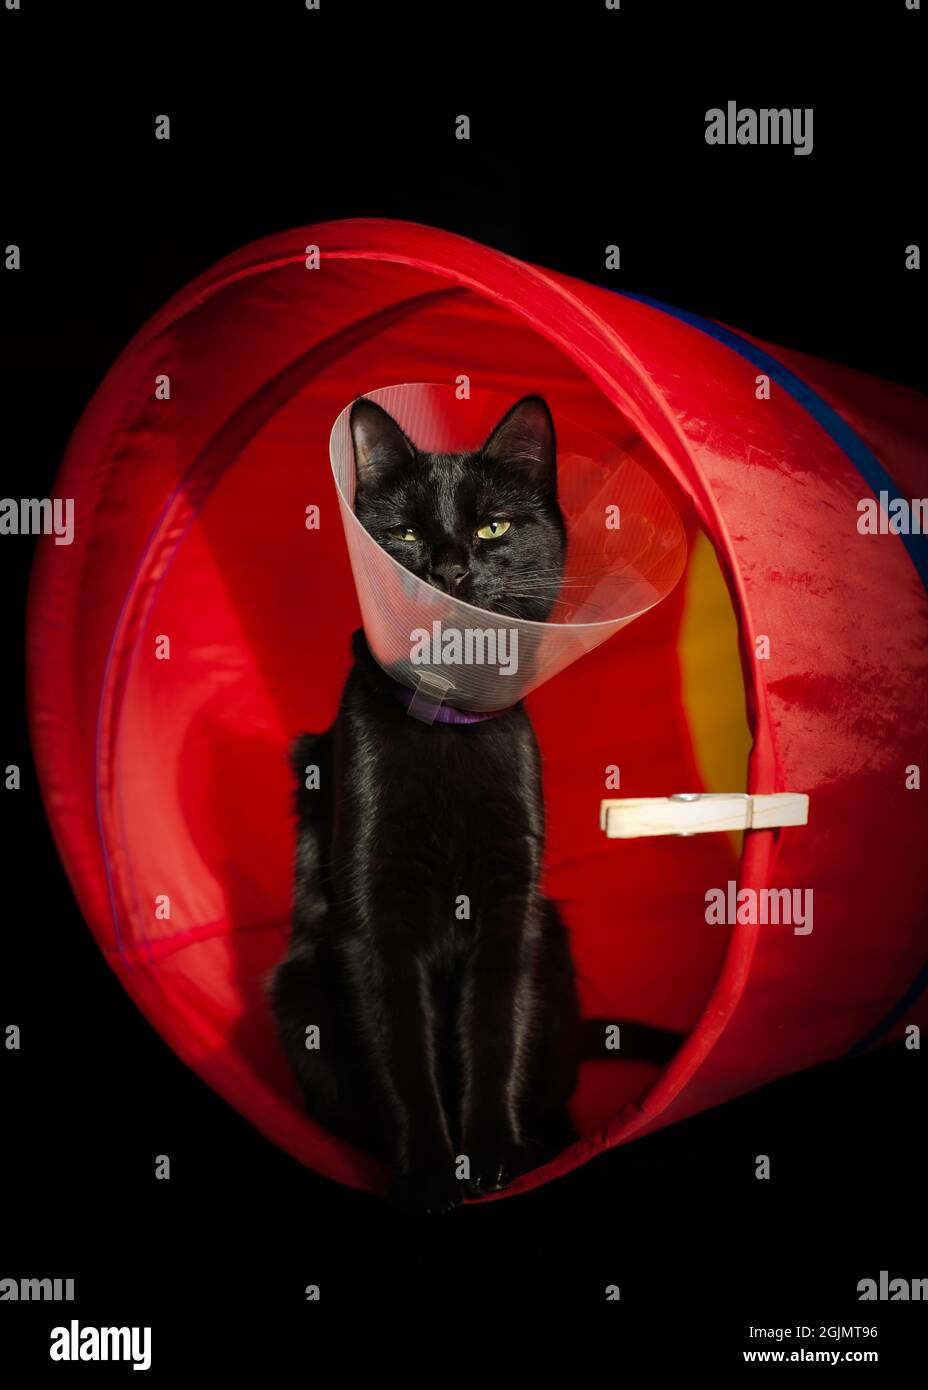 Black cat with a recovery collar, sitting in a red tunnel. Black background. A clothespin hanging on the tunnel. Stock Photo